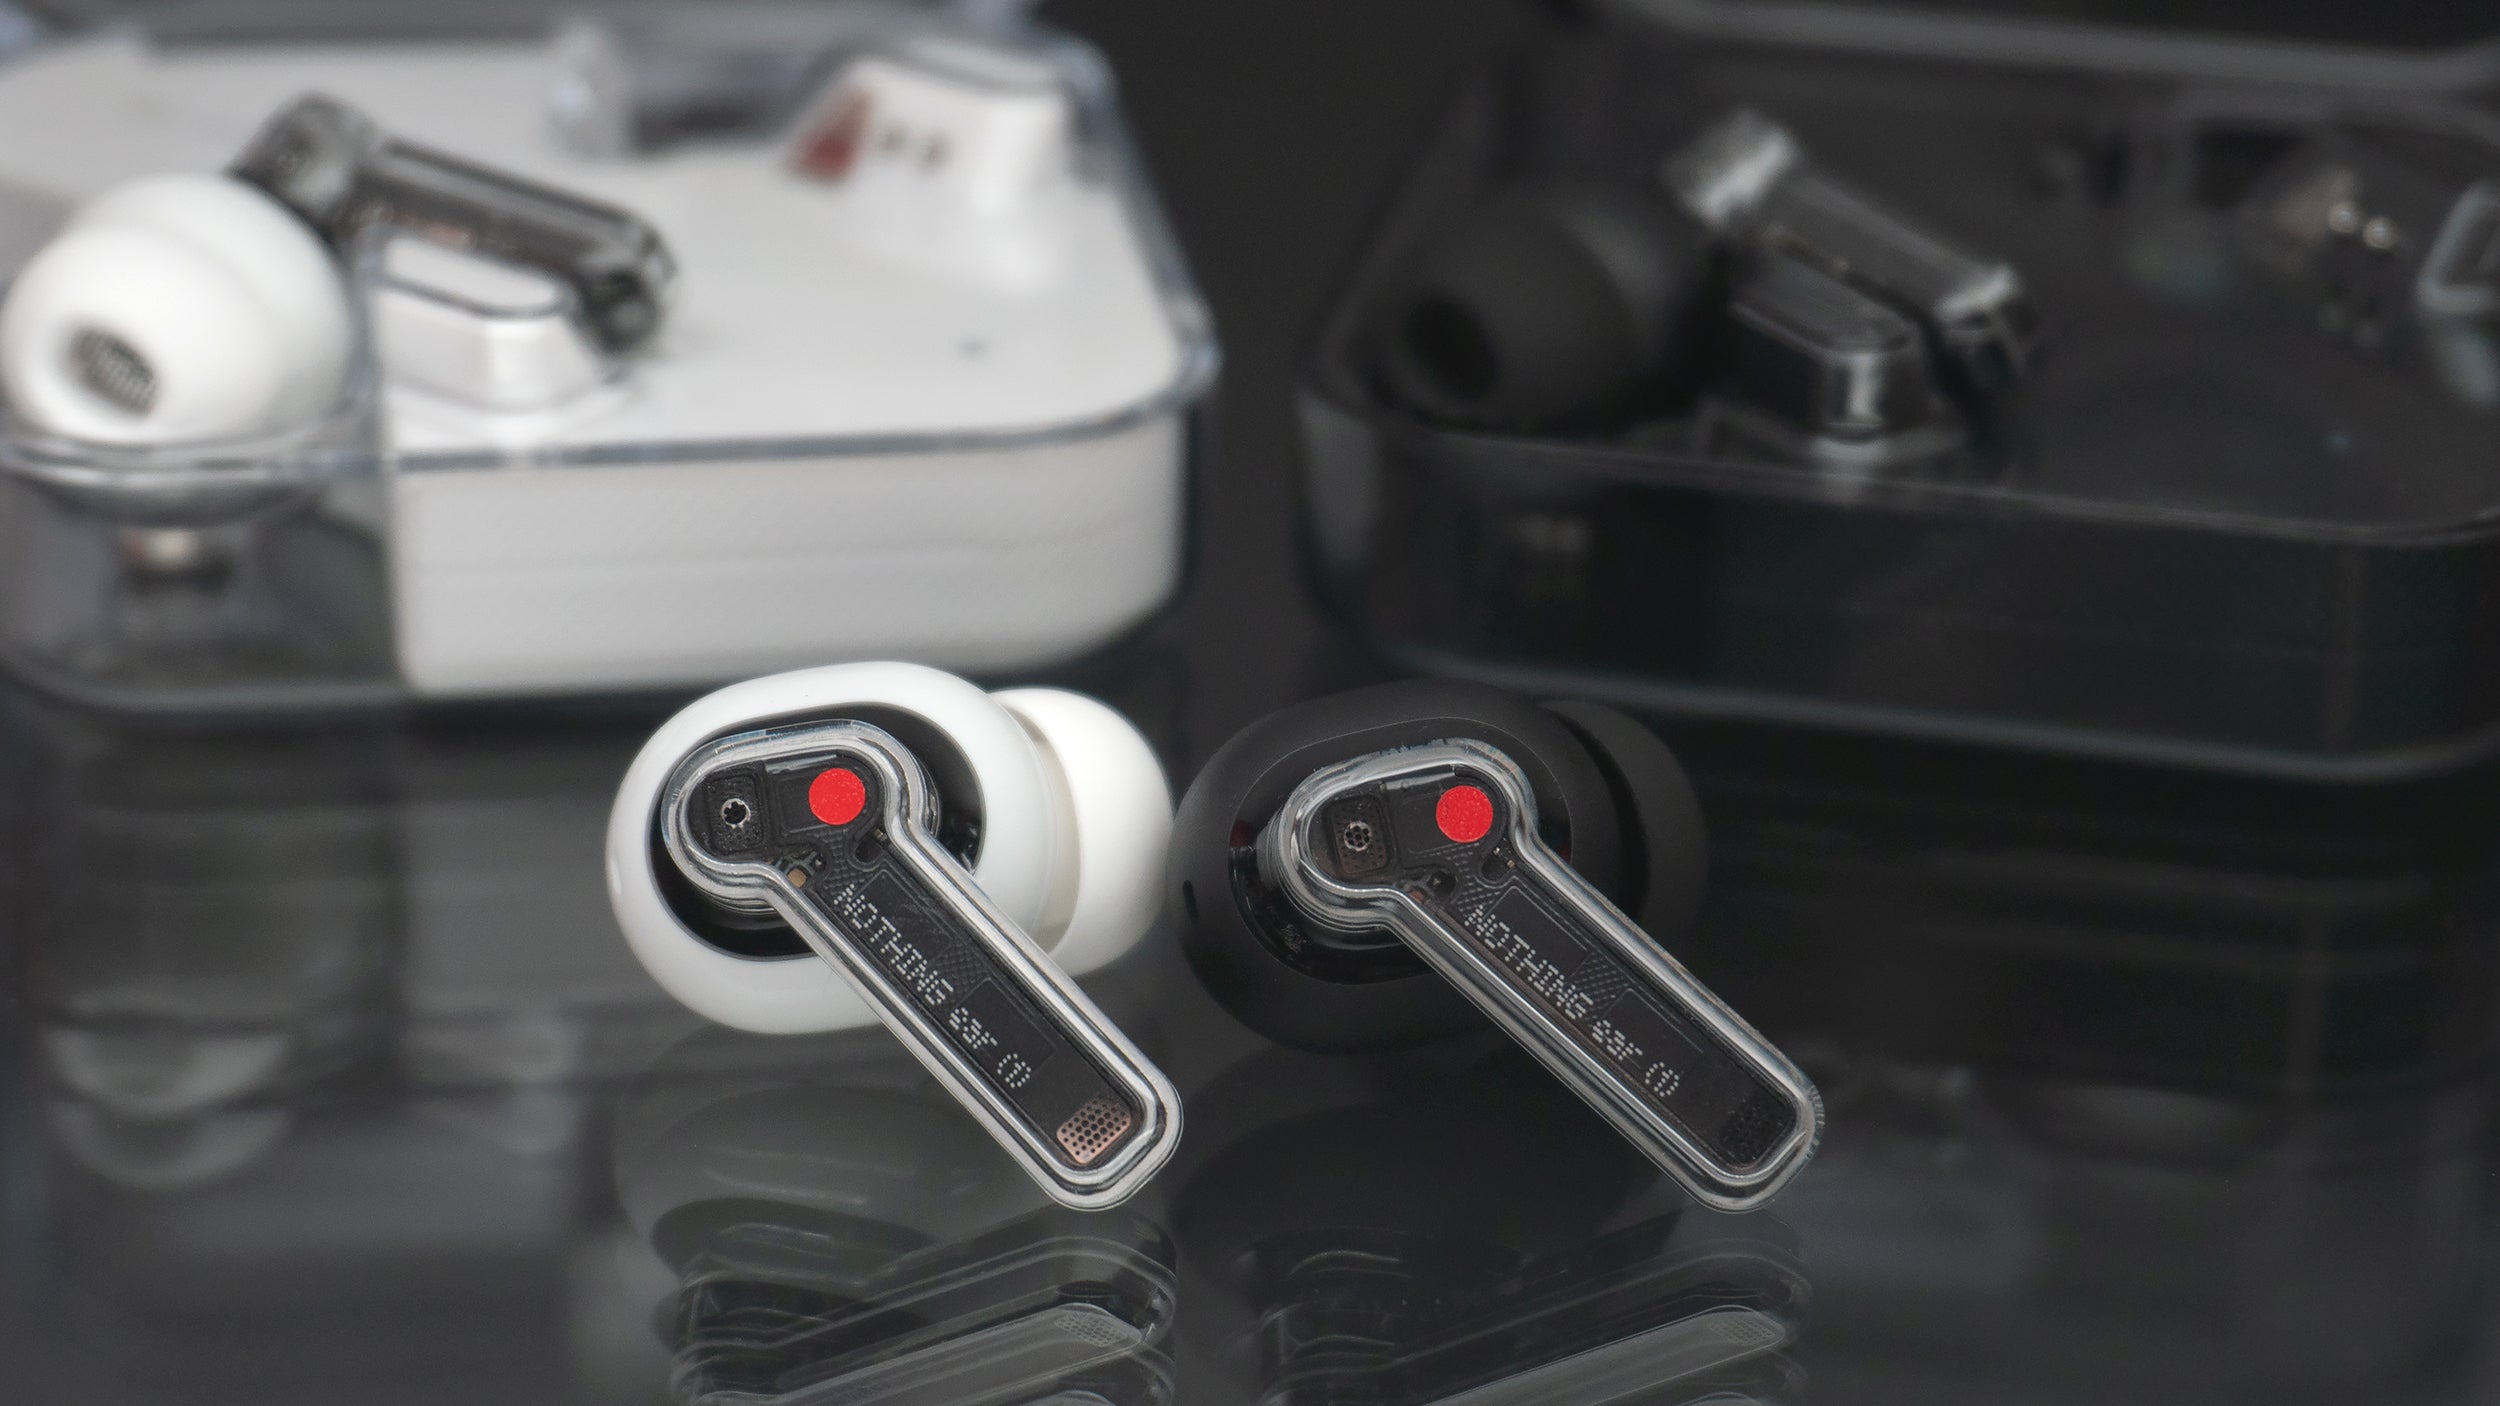 If you're not a fan of the shiny white Apple AirPods aesthetic, the Ear (1) black edition might be a better fit. (Photo: Andrew Liszewski - Gizmodo)